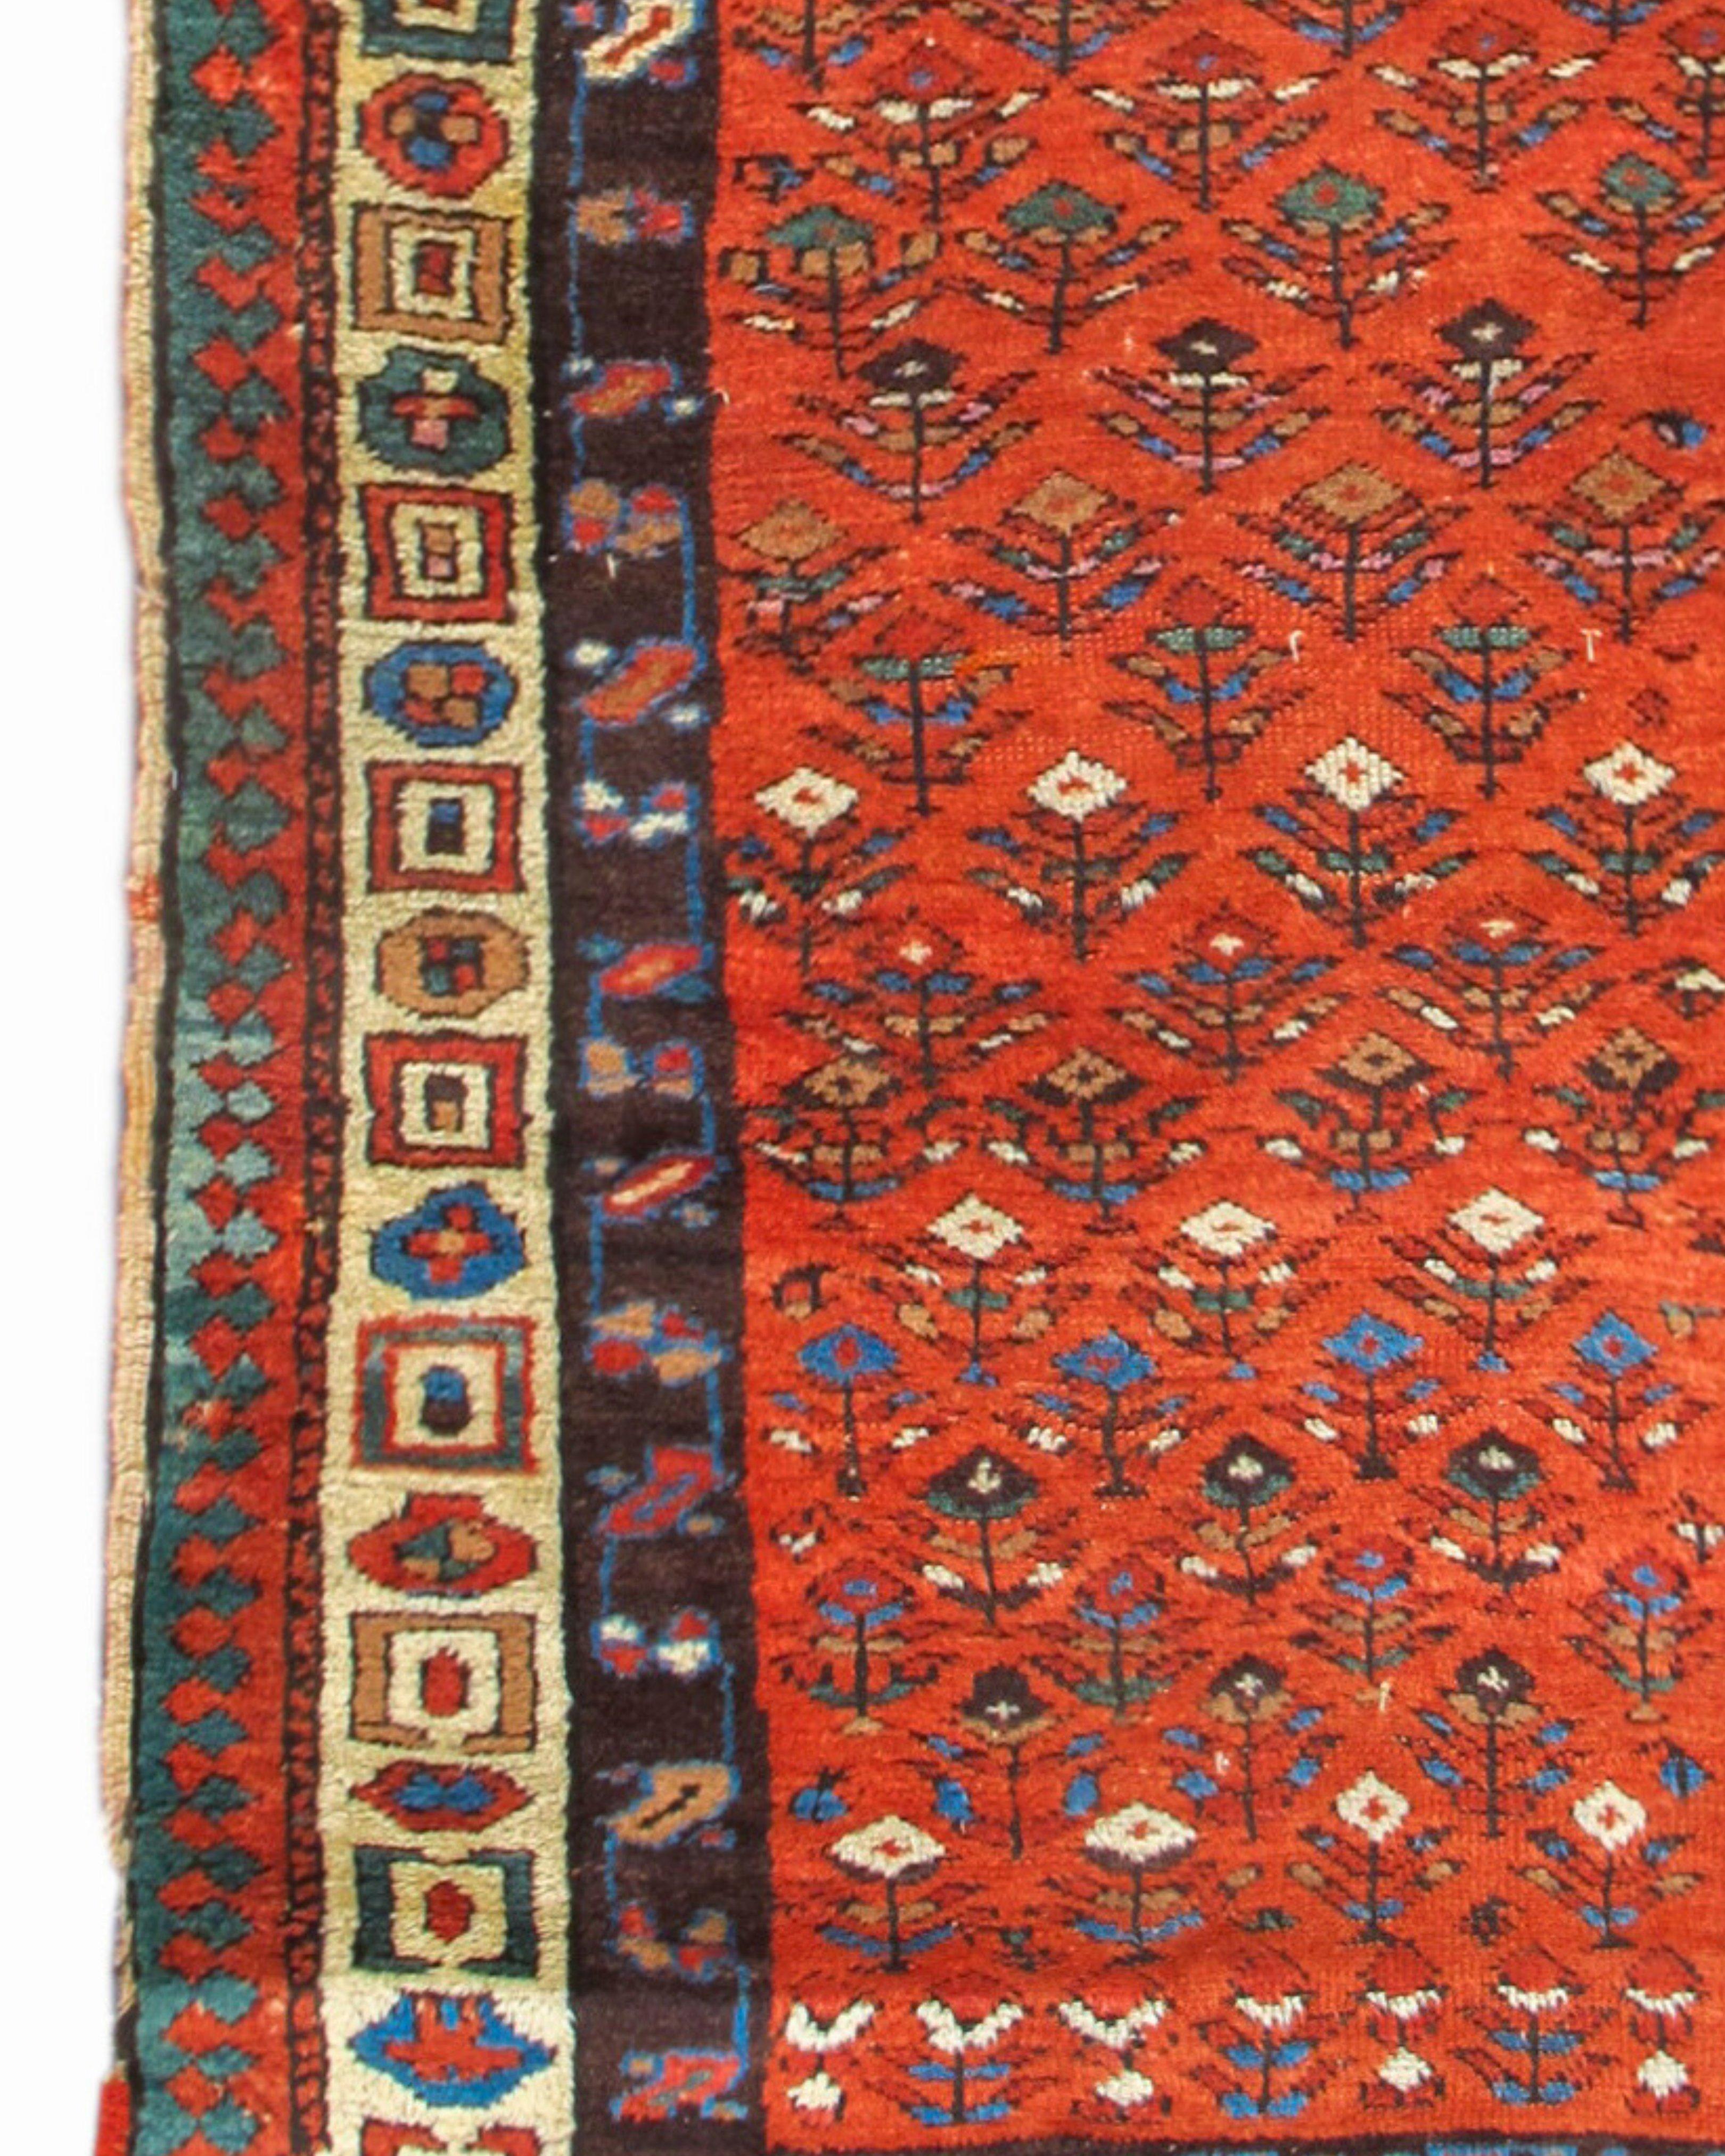 Antique Persian Kurdish Runner Rug, Late 19th Century

Additional Information:
Dimensions: 3'7